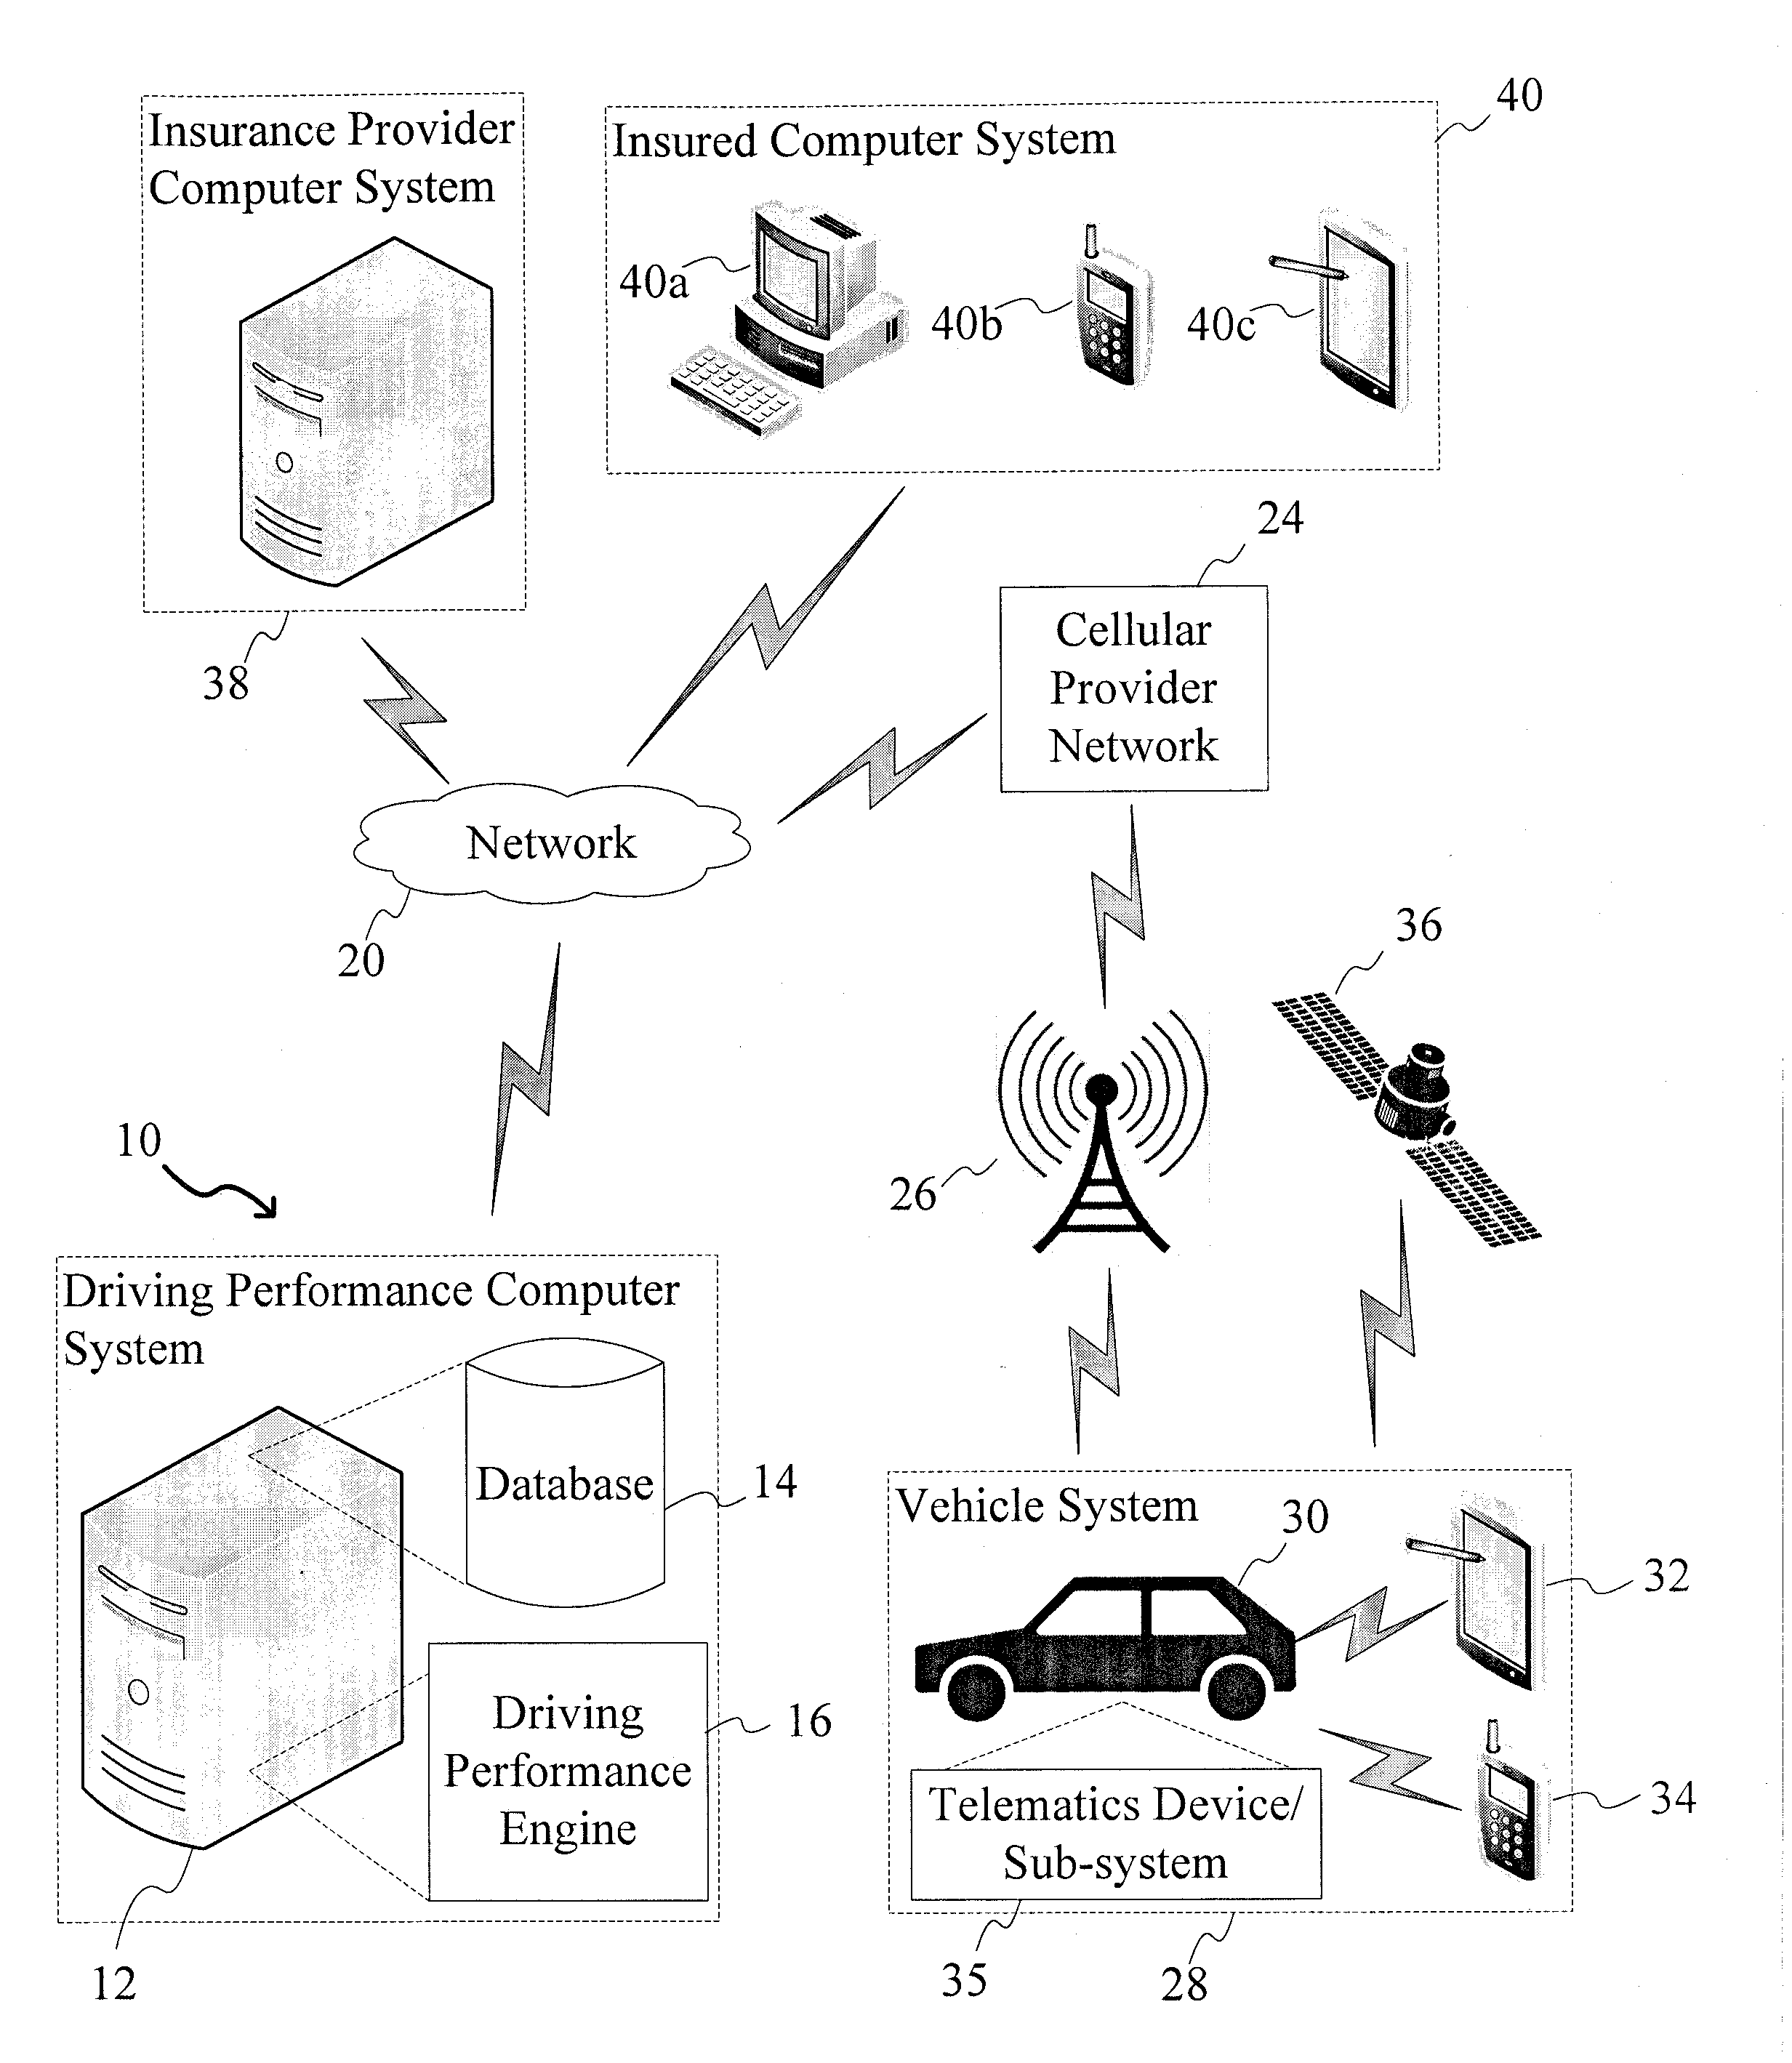 Apparatus and Method for Analyzing Driving Performance Data